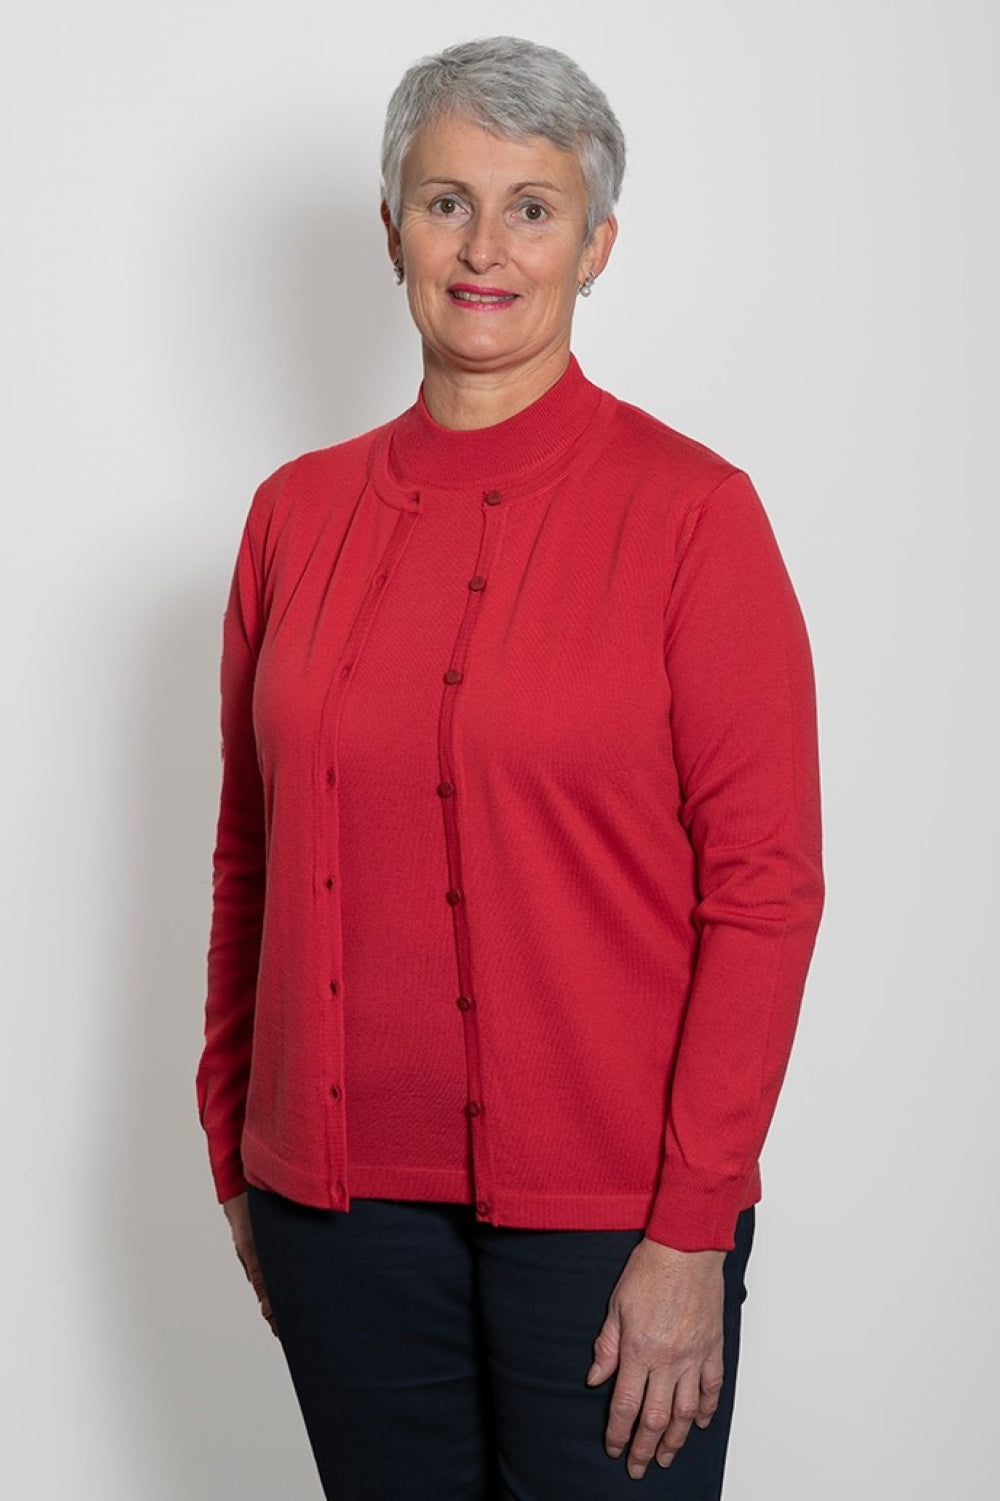 Raspberry, AOK Clothing's Classic Merino Button to Neck Cardigan is available in a variety of colours This fully fashioned button to neck style cardigan is constructed of 100% Fine NZ Merino Wool and made in Italy